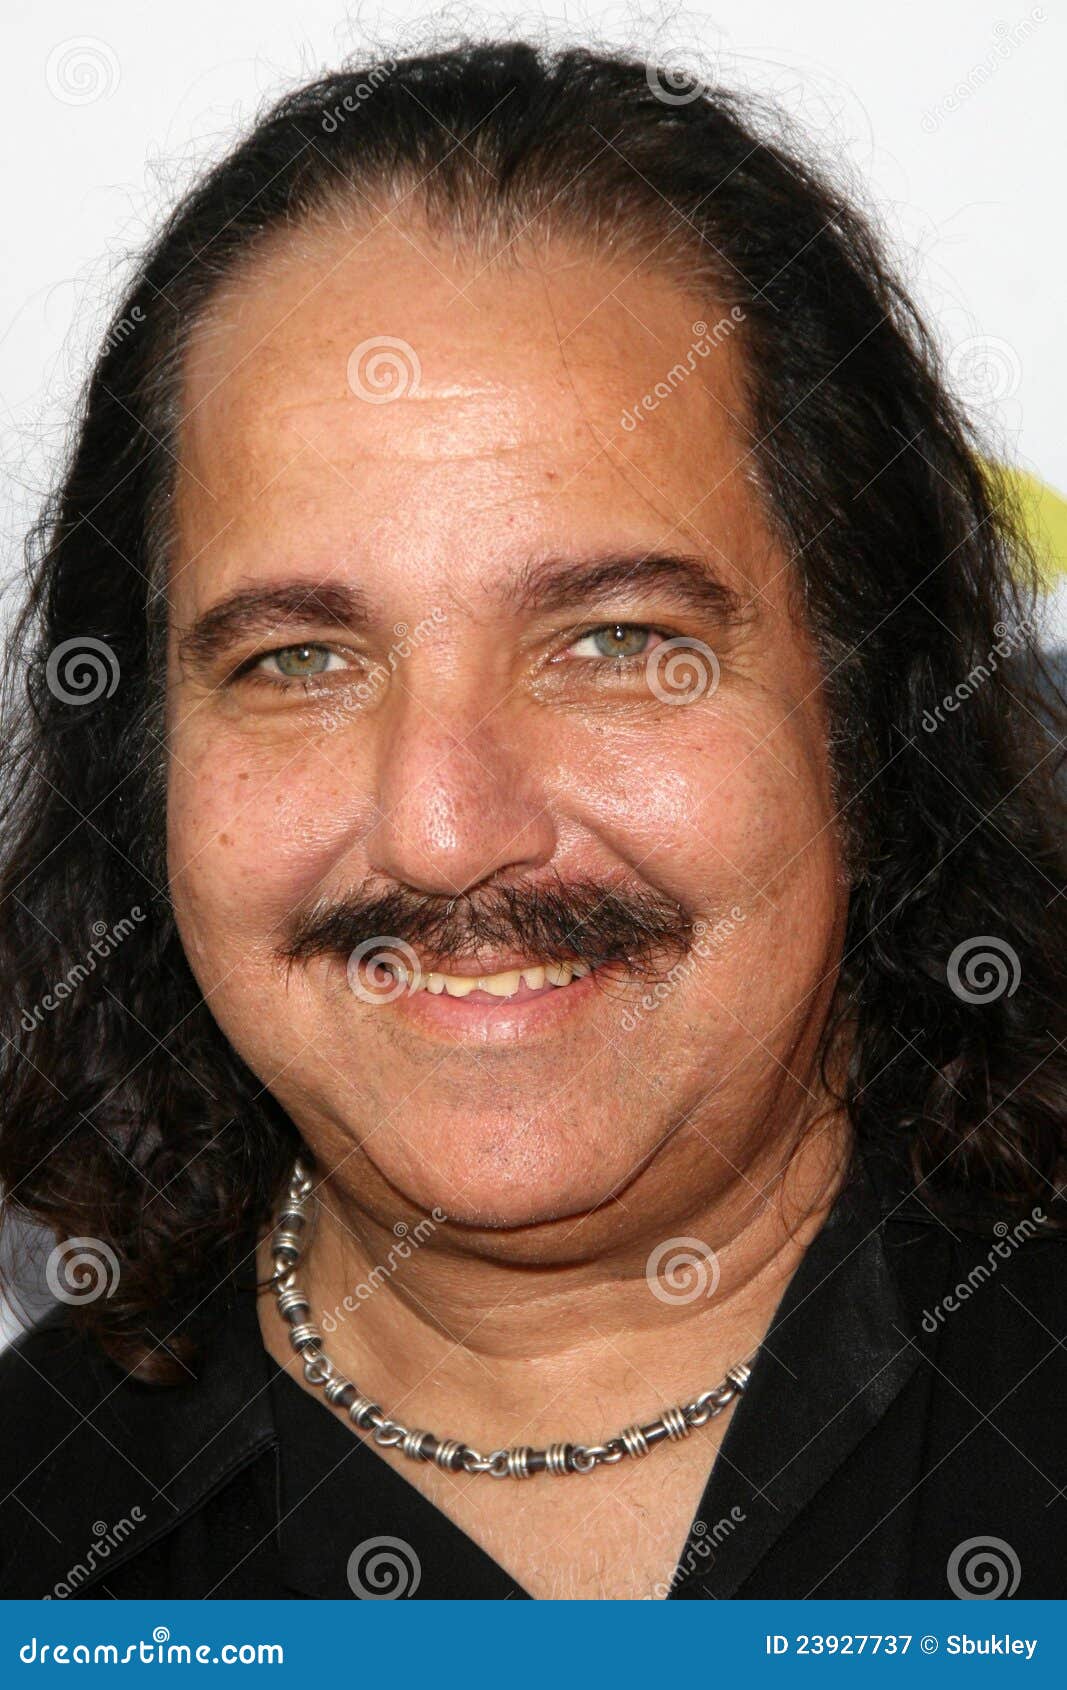 aimee ishmael recommends images of ron jeremy pic